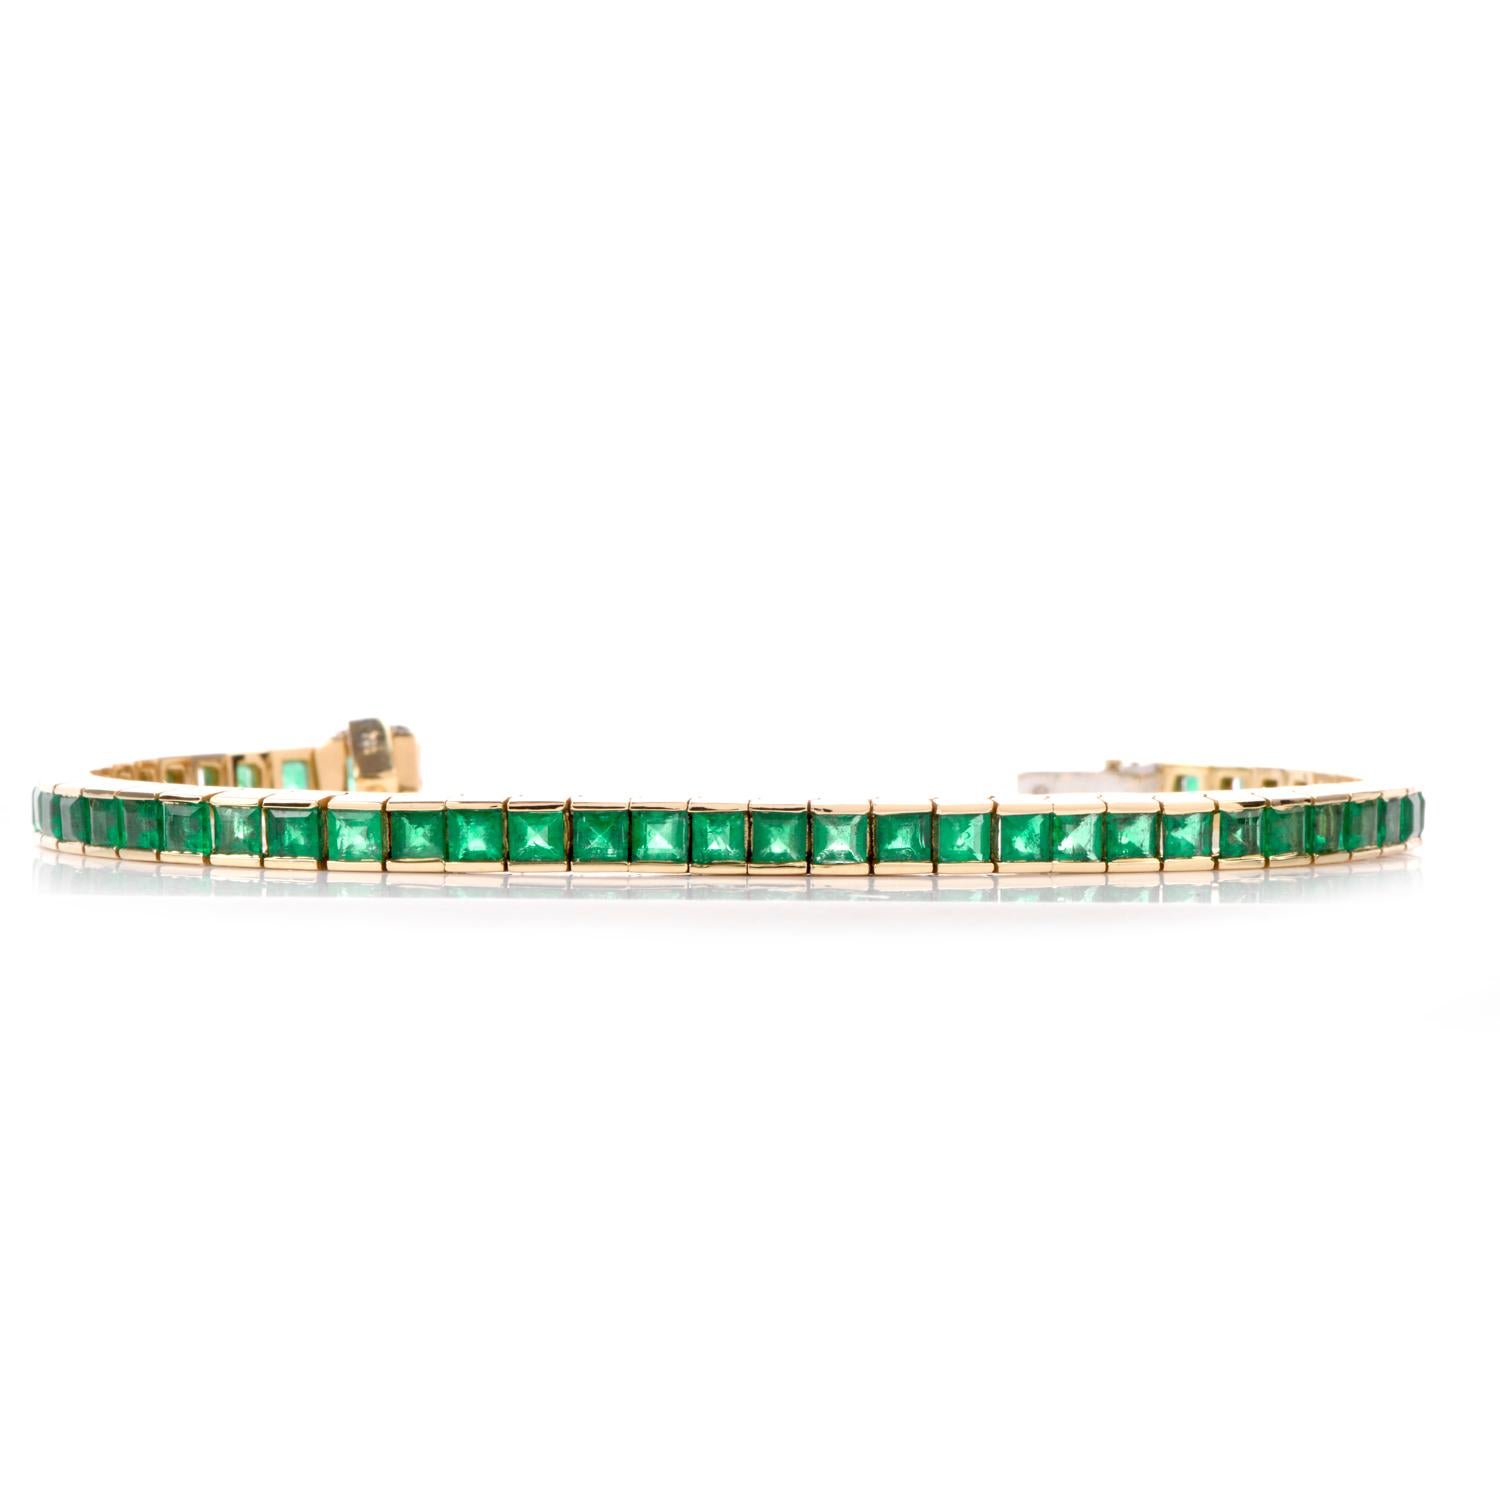 This Estate 1980's Emerald bracelet is inspired in a Tennis Bracelet design and crafted in 18K yellow gold. Individual links with channel set square cut Emeralds adorn from one end to the other. Emeralds are high quality and weigh approx. 13.85